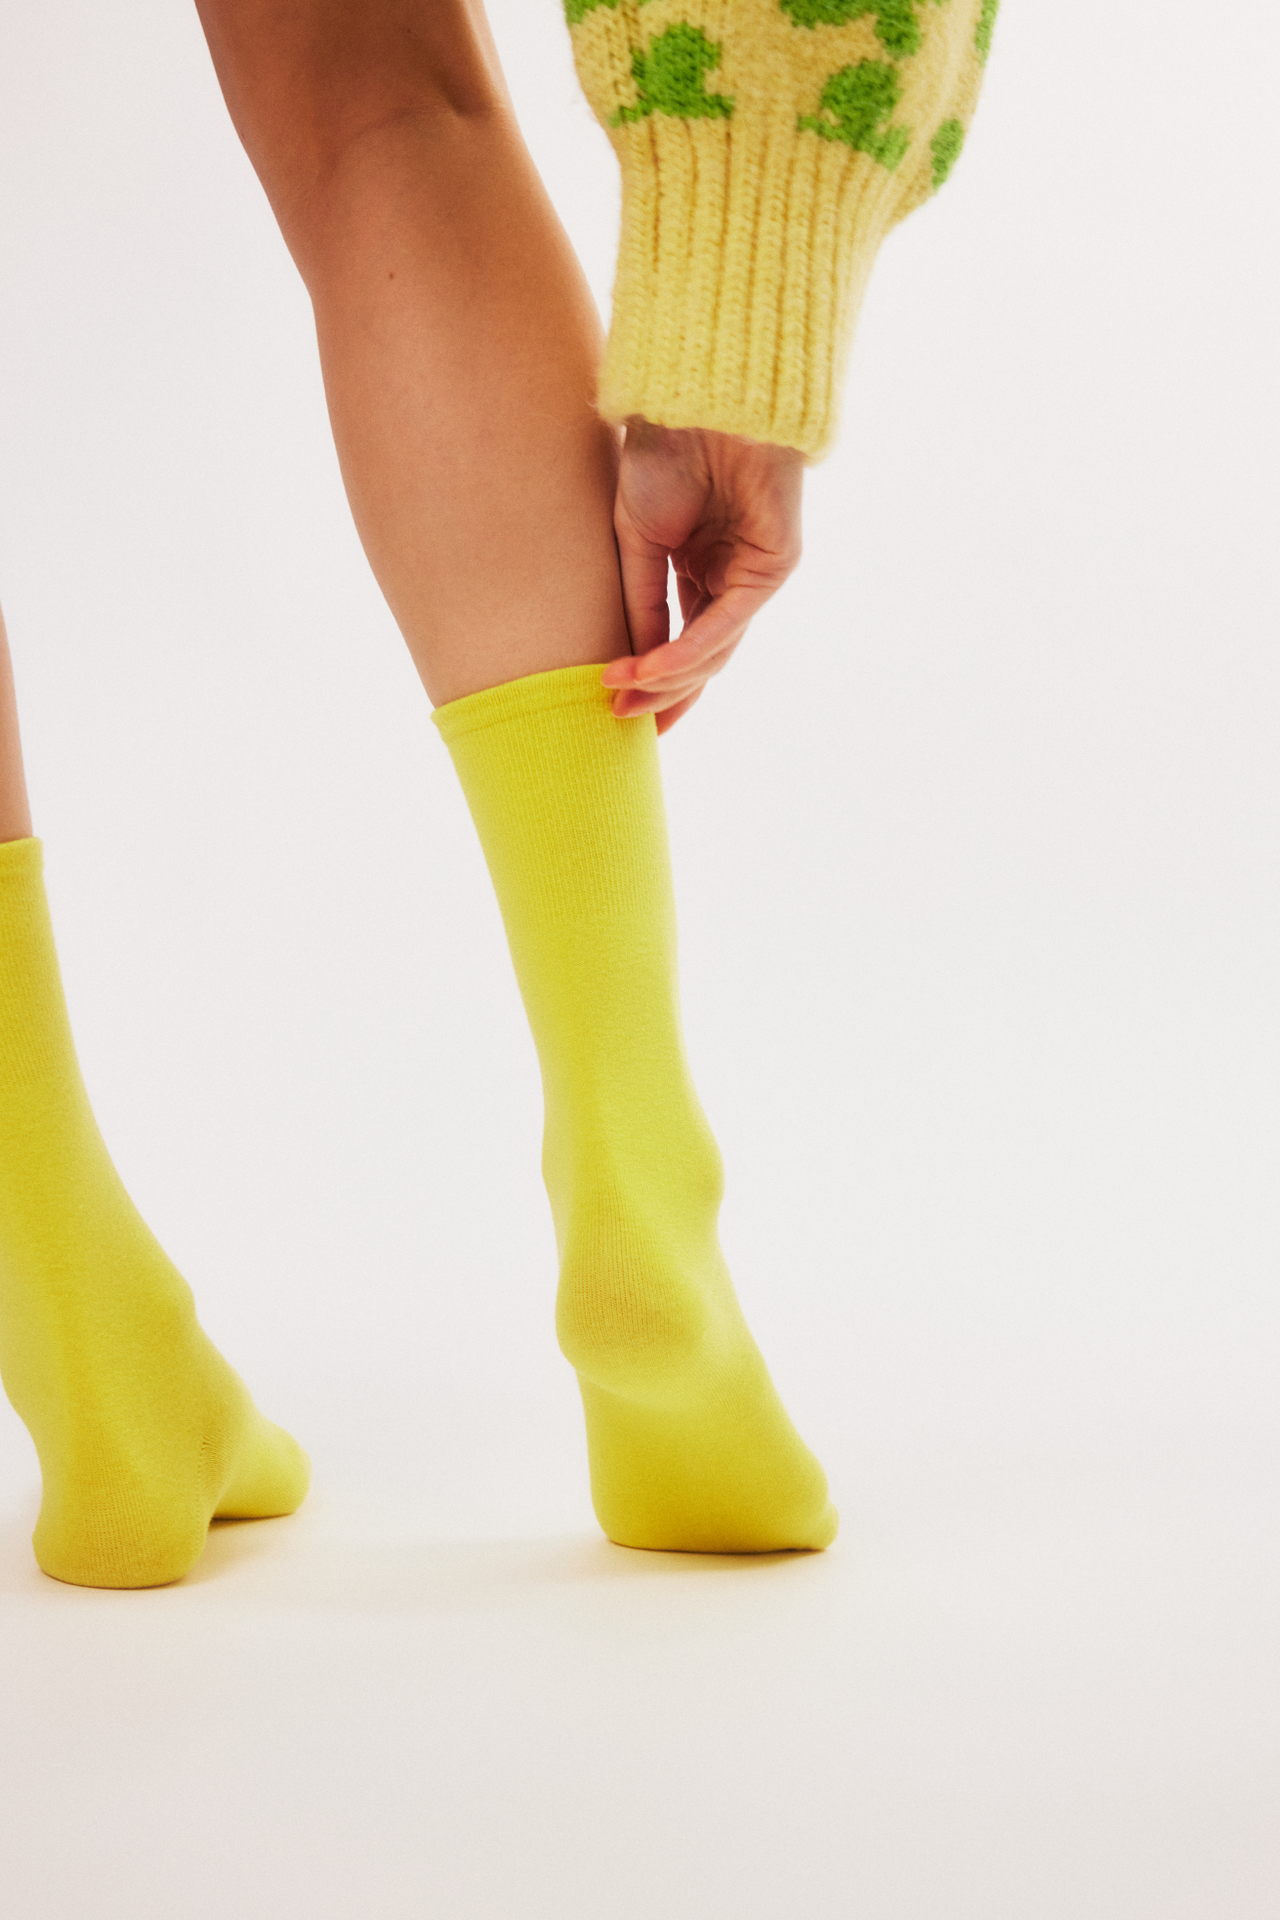 <p style="text-align:right; font-size:18px; margin-top:18px;margin-right:18px;"><span style="color:#666;">Light Yellow Socks<br><span style="color:#666;">Shop→</span></p>